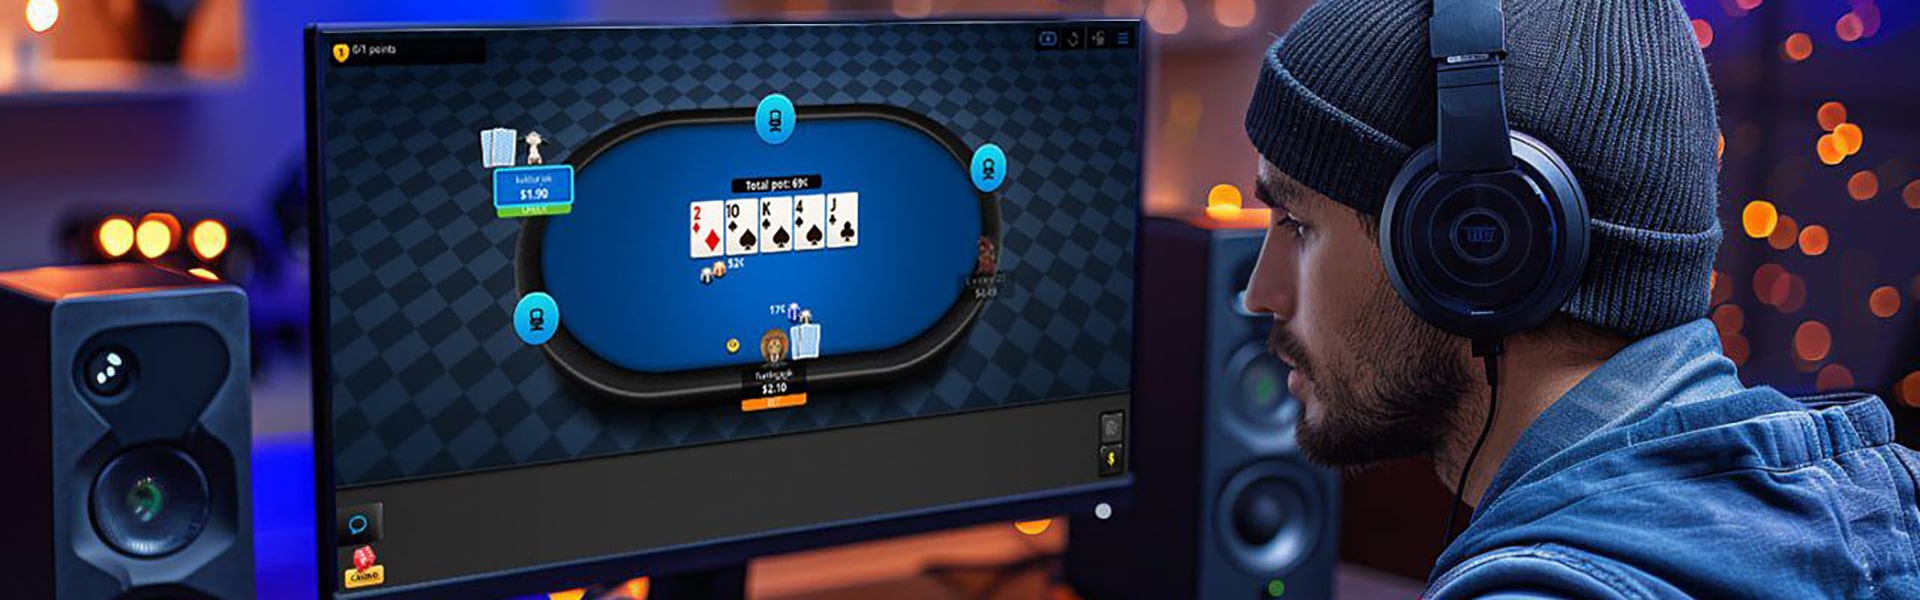 Flop, turn, river in poker: what are those and what to do with it?